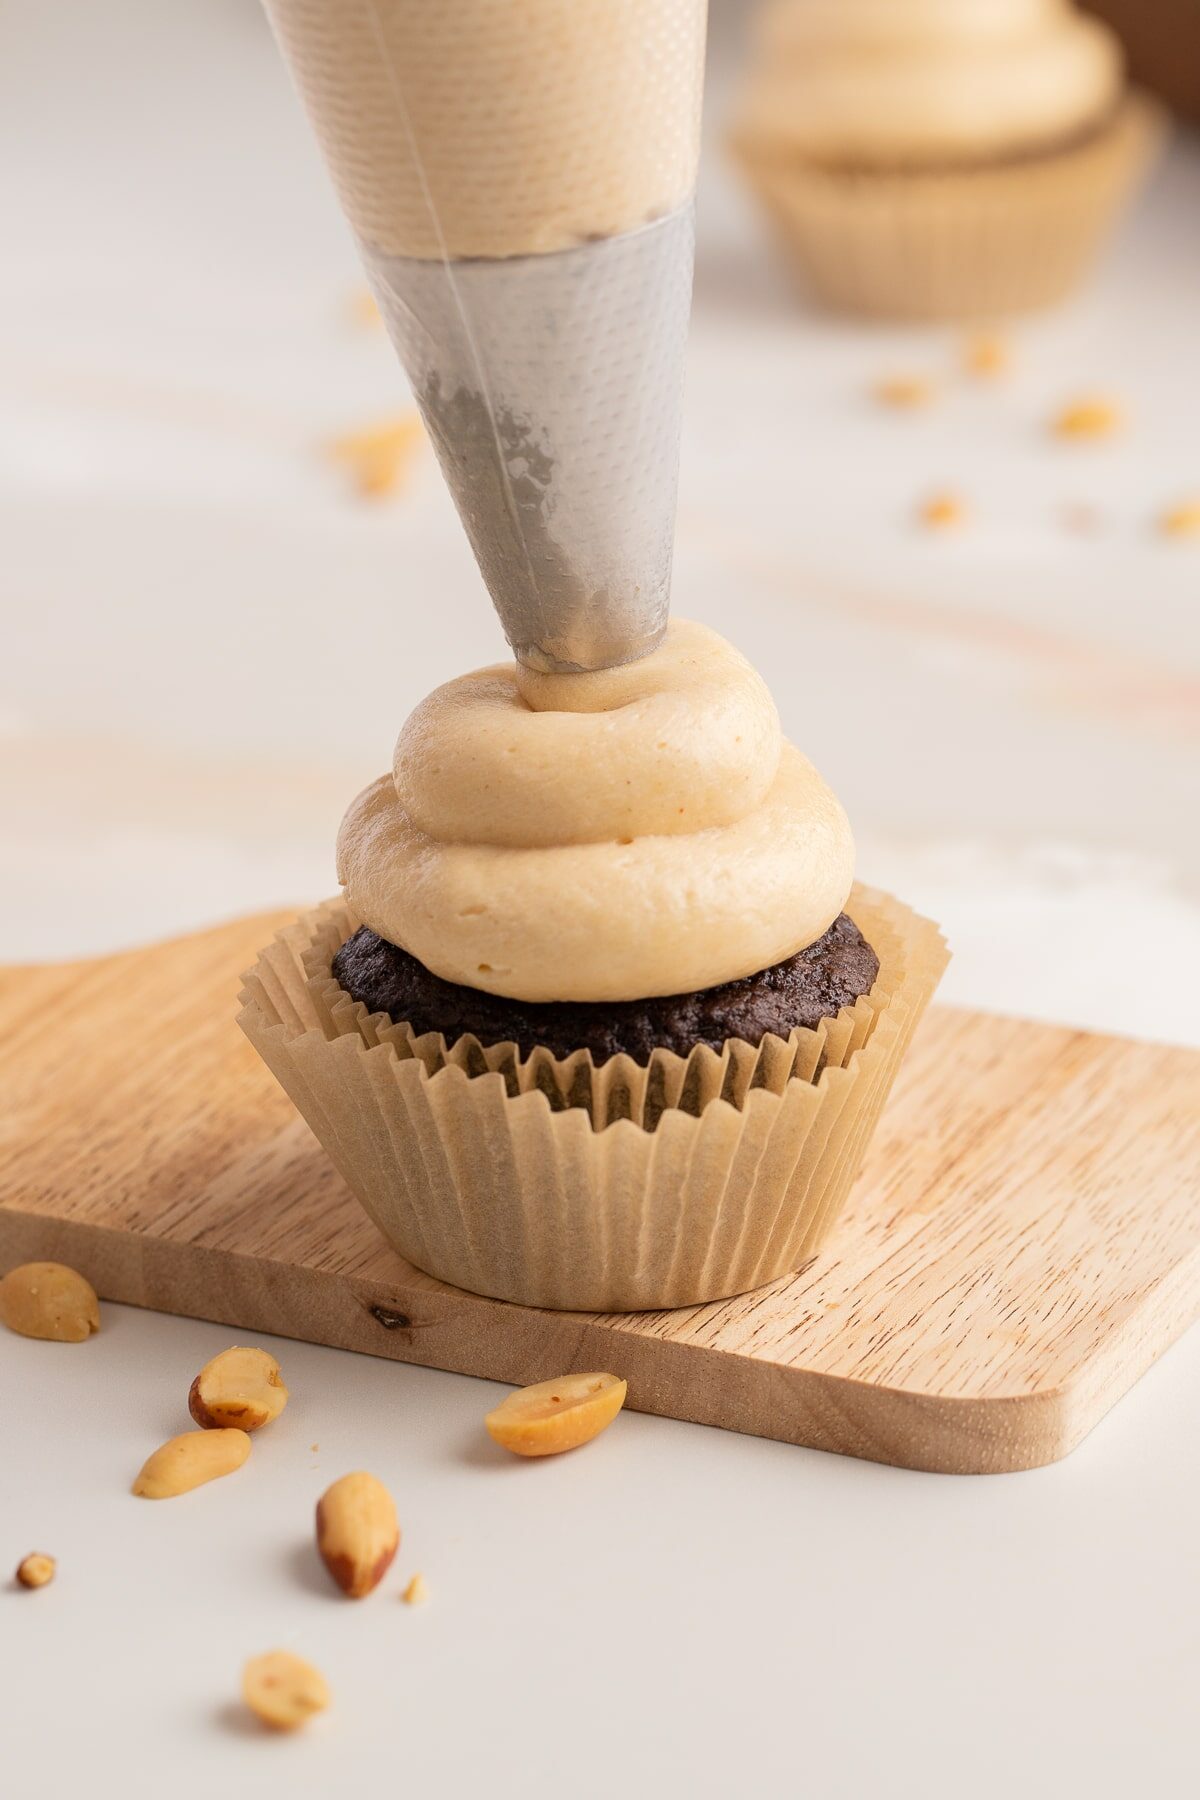 piping peanut butter cream cheese frosting on chocolate cupcake.